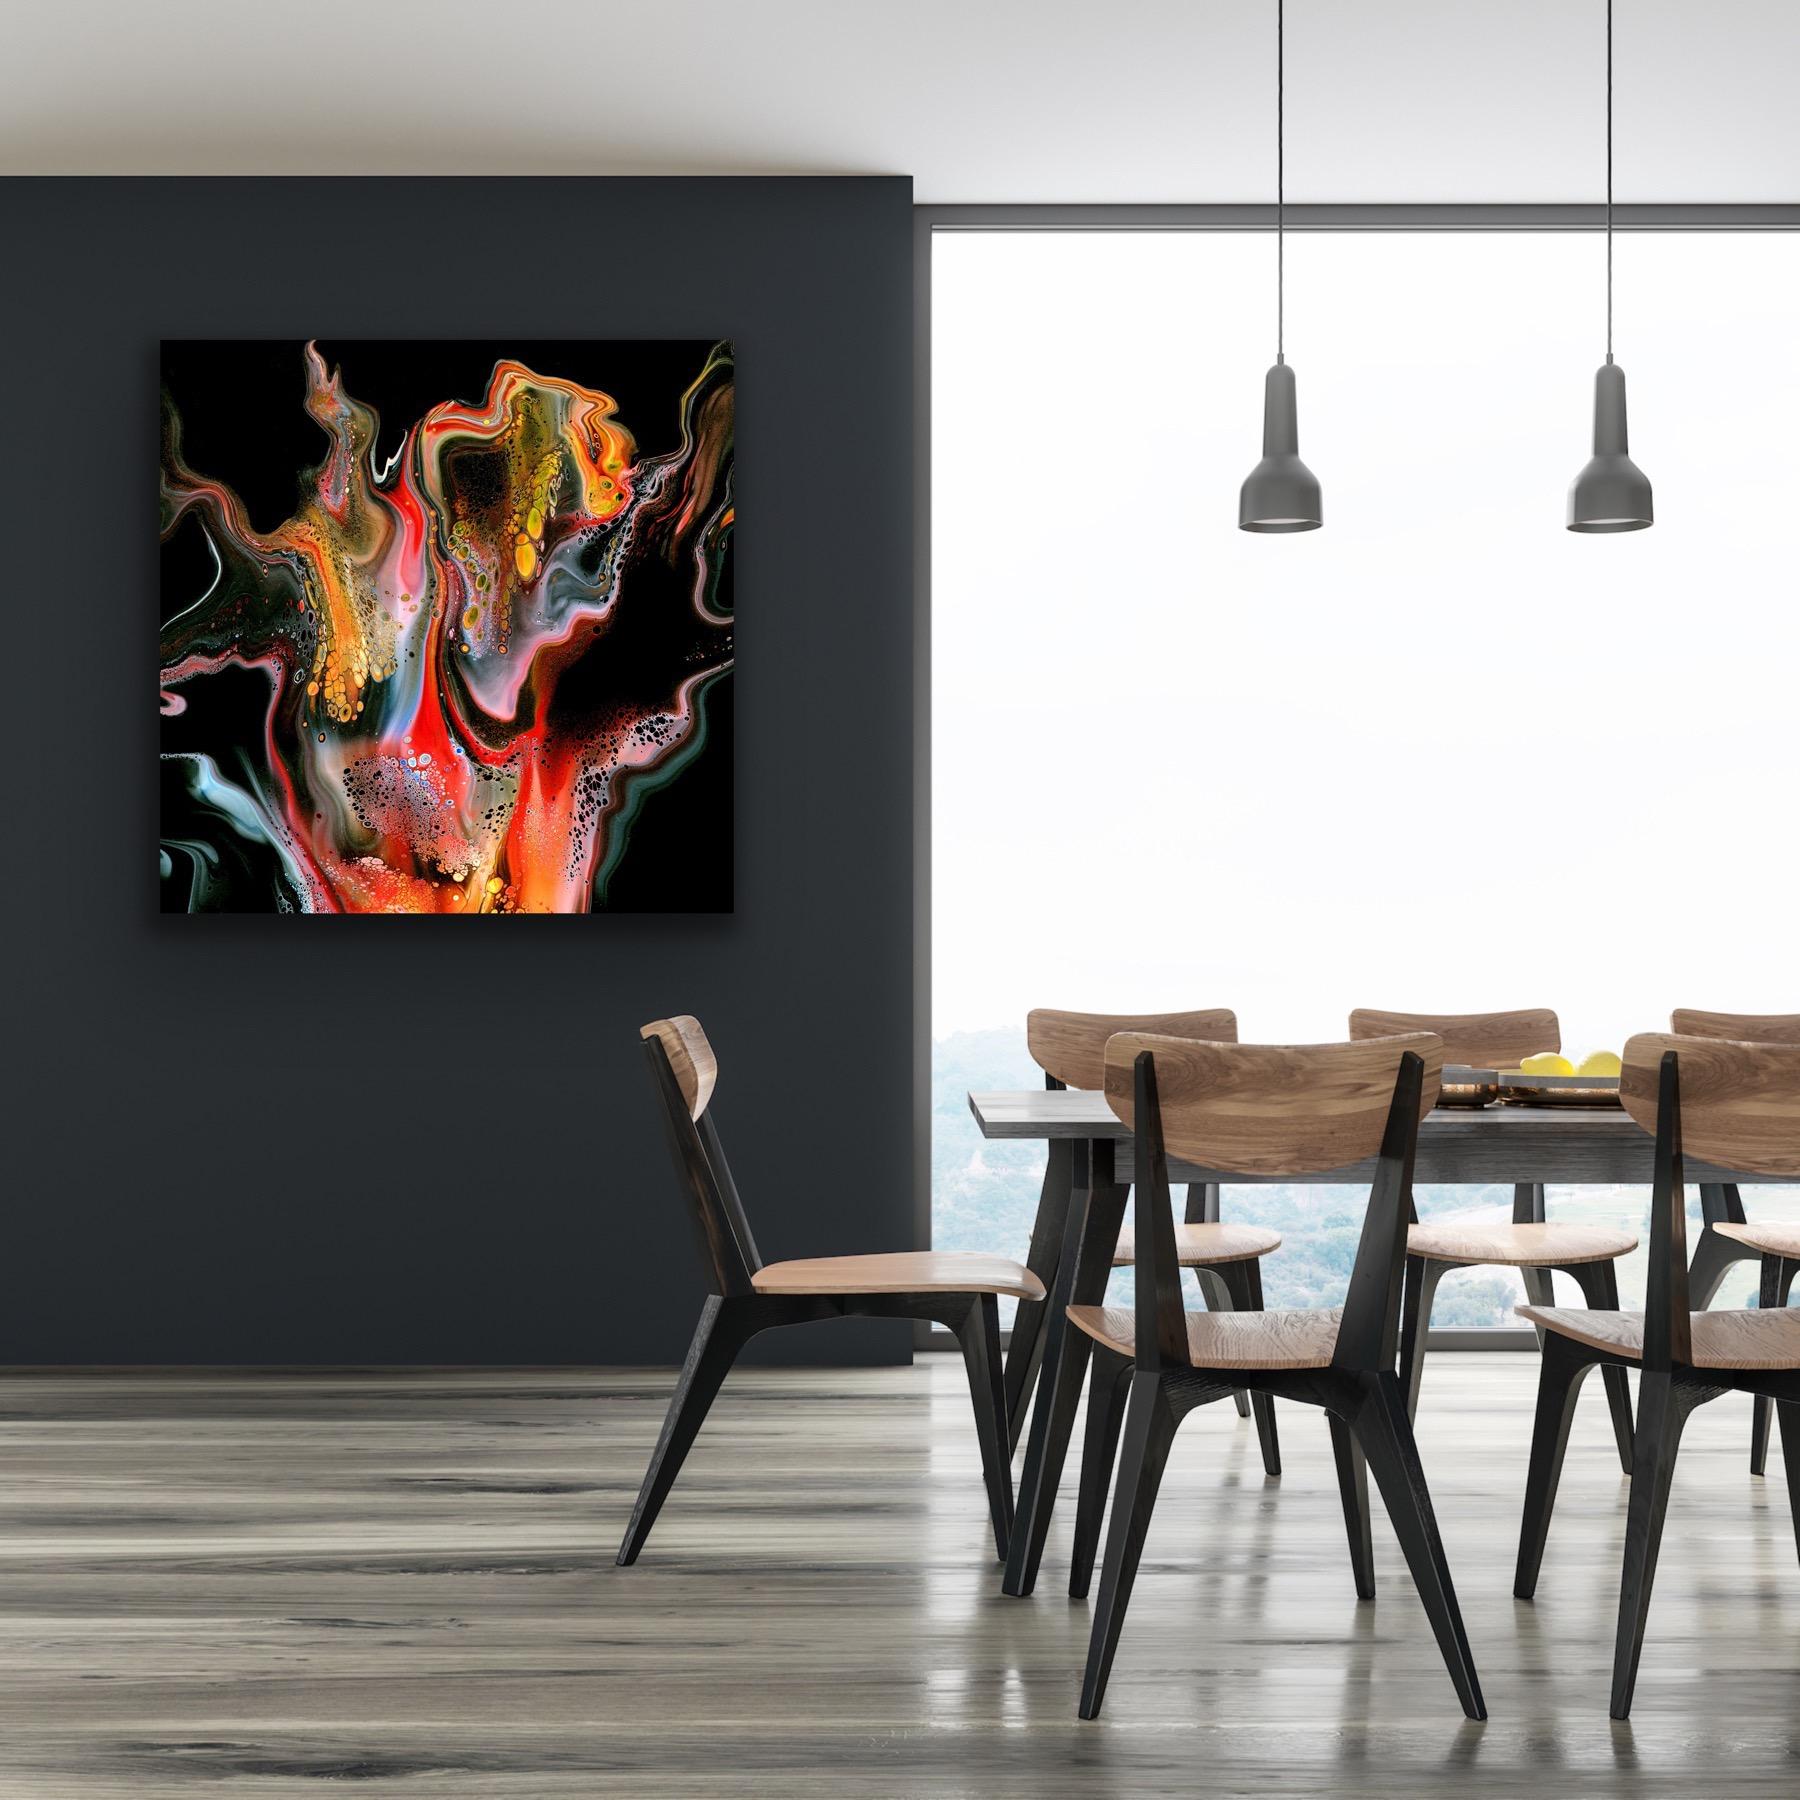 Contemporary Modern Abstract, Giclee Print on Metal, Limited Edition, by Cessy  For Sale 6